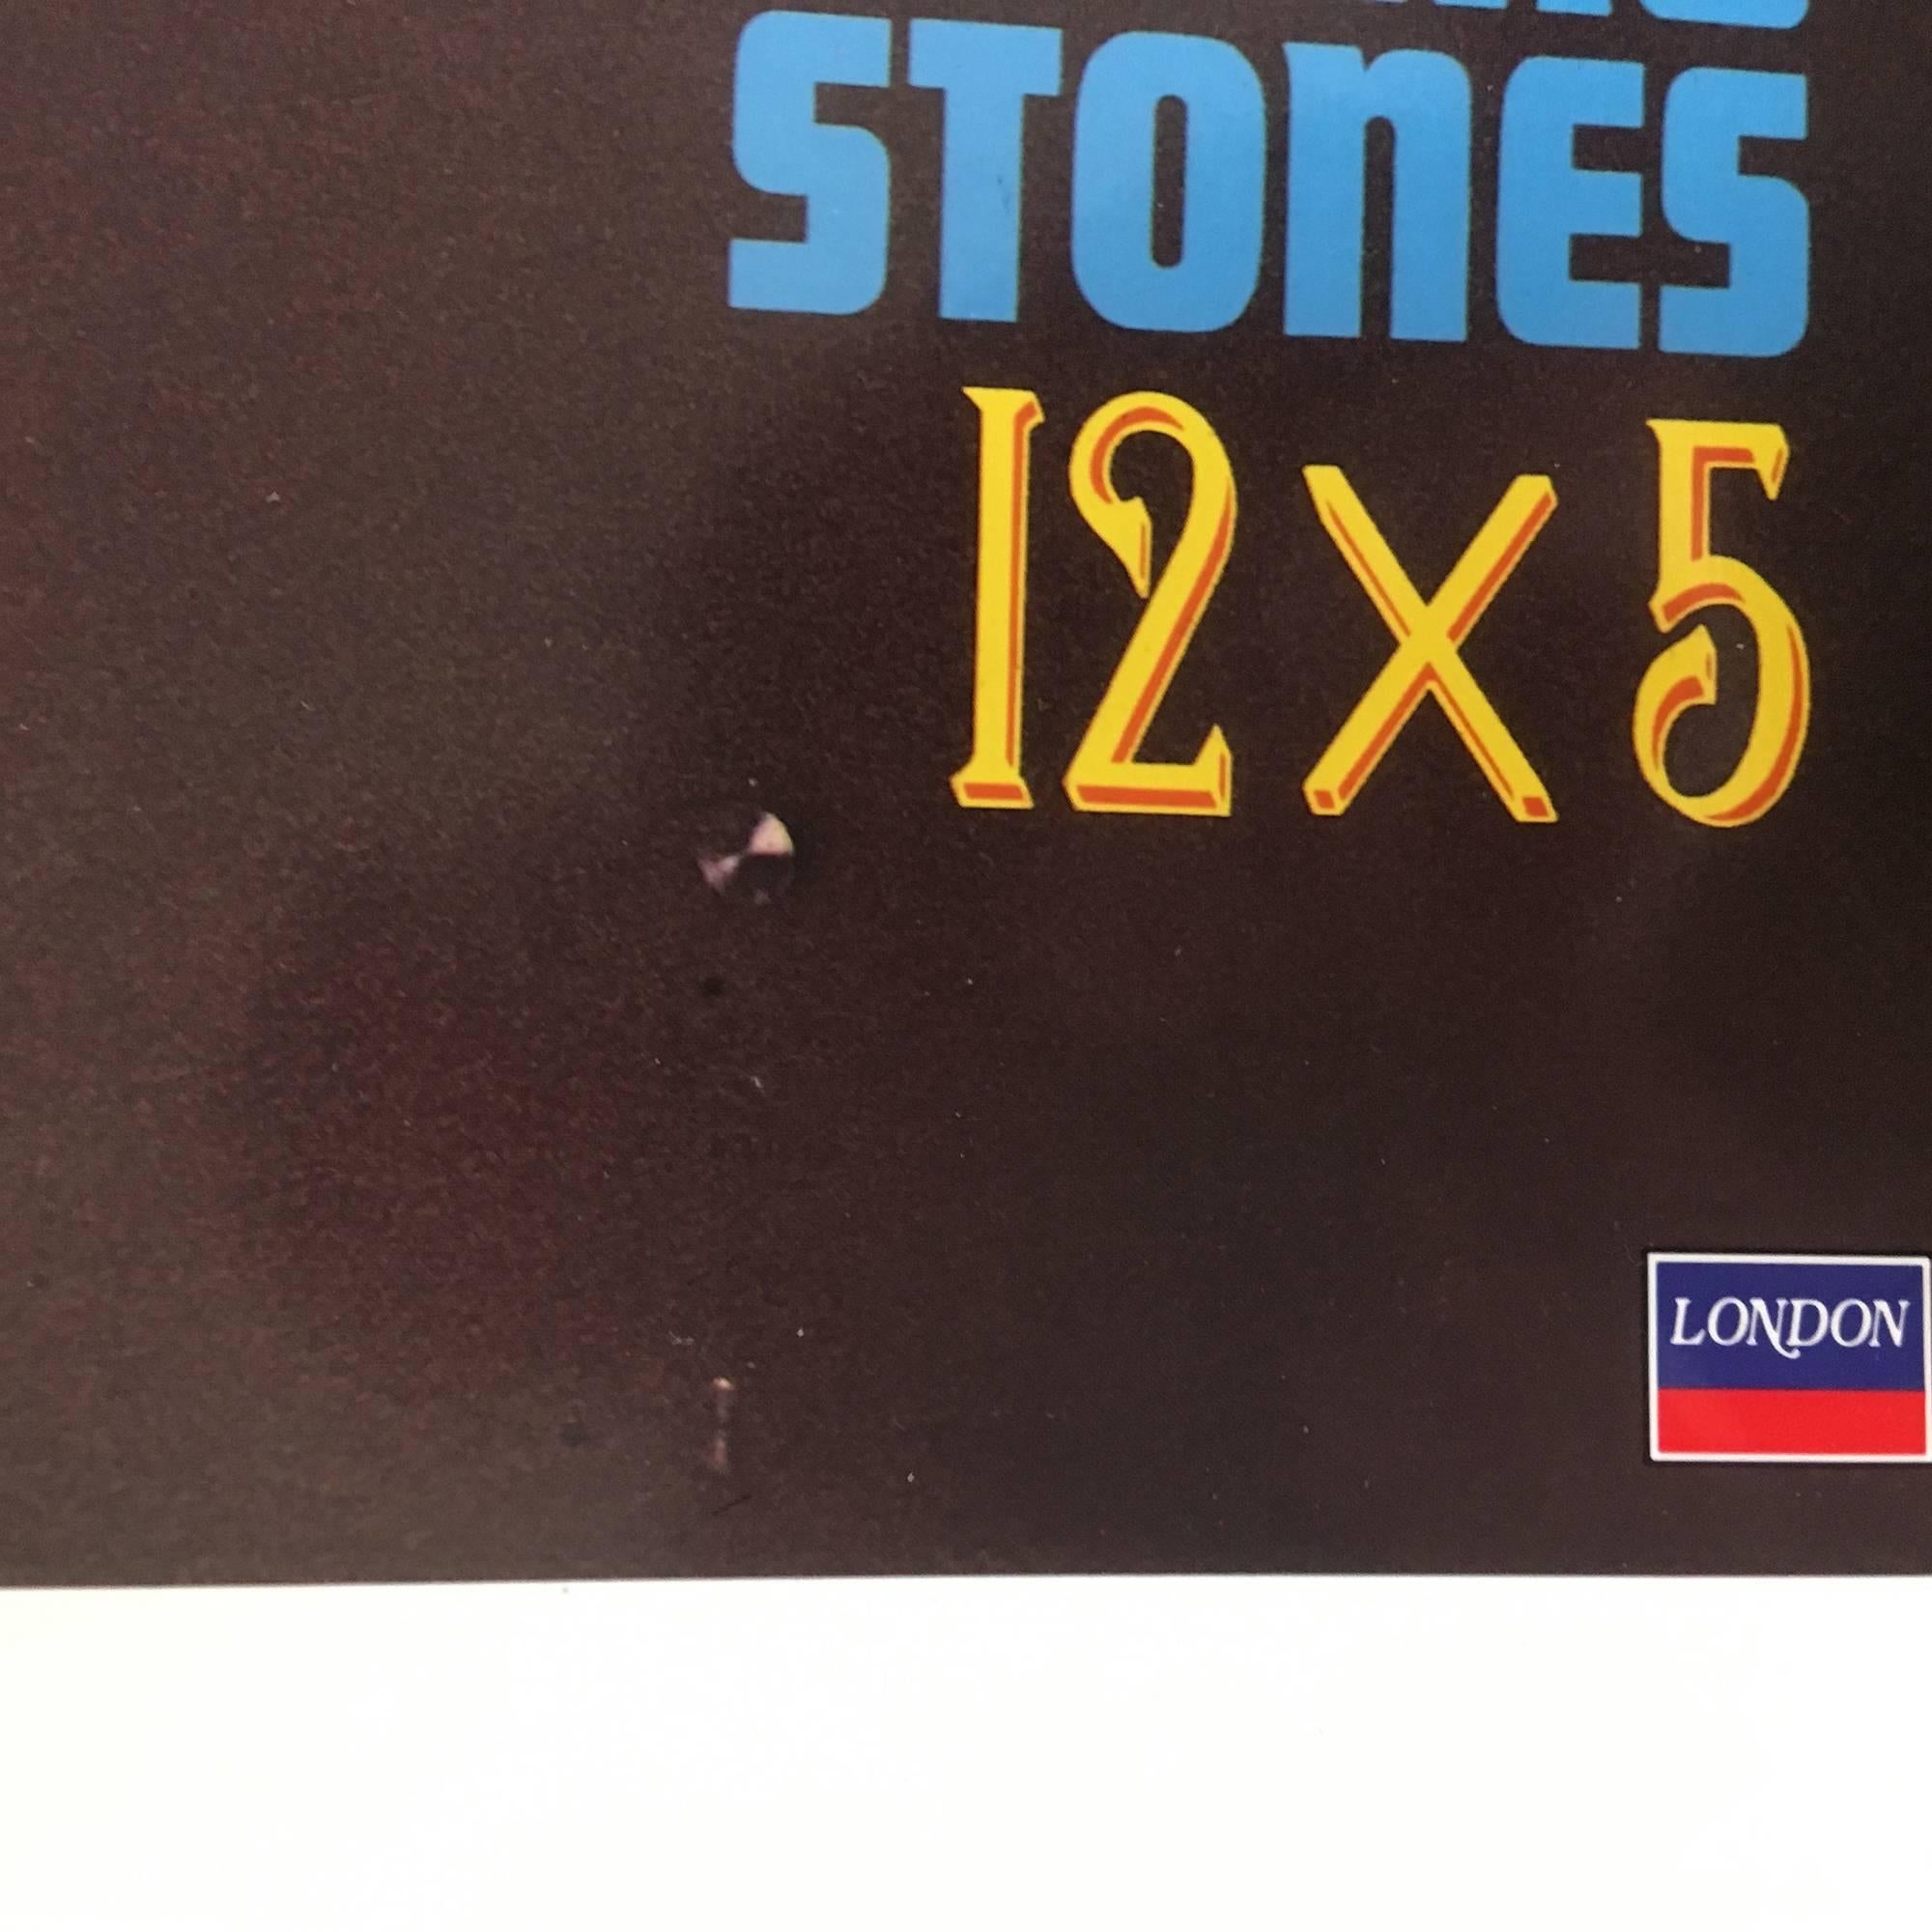 ROLLING STONES 12x5 Album Extremely Rare Cromalin Proof Artwork 1984 For Sale 1